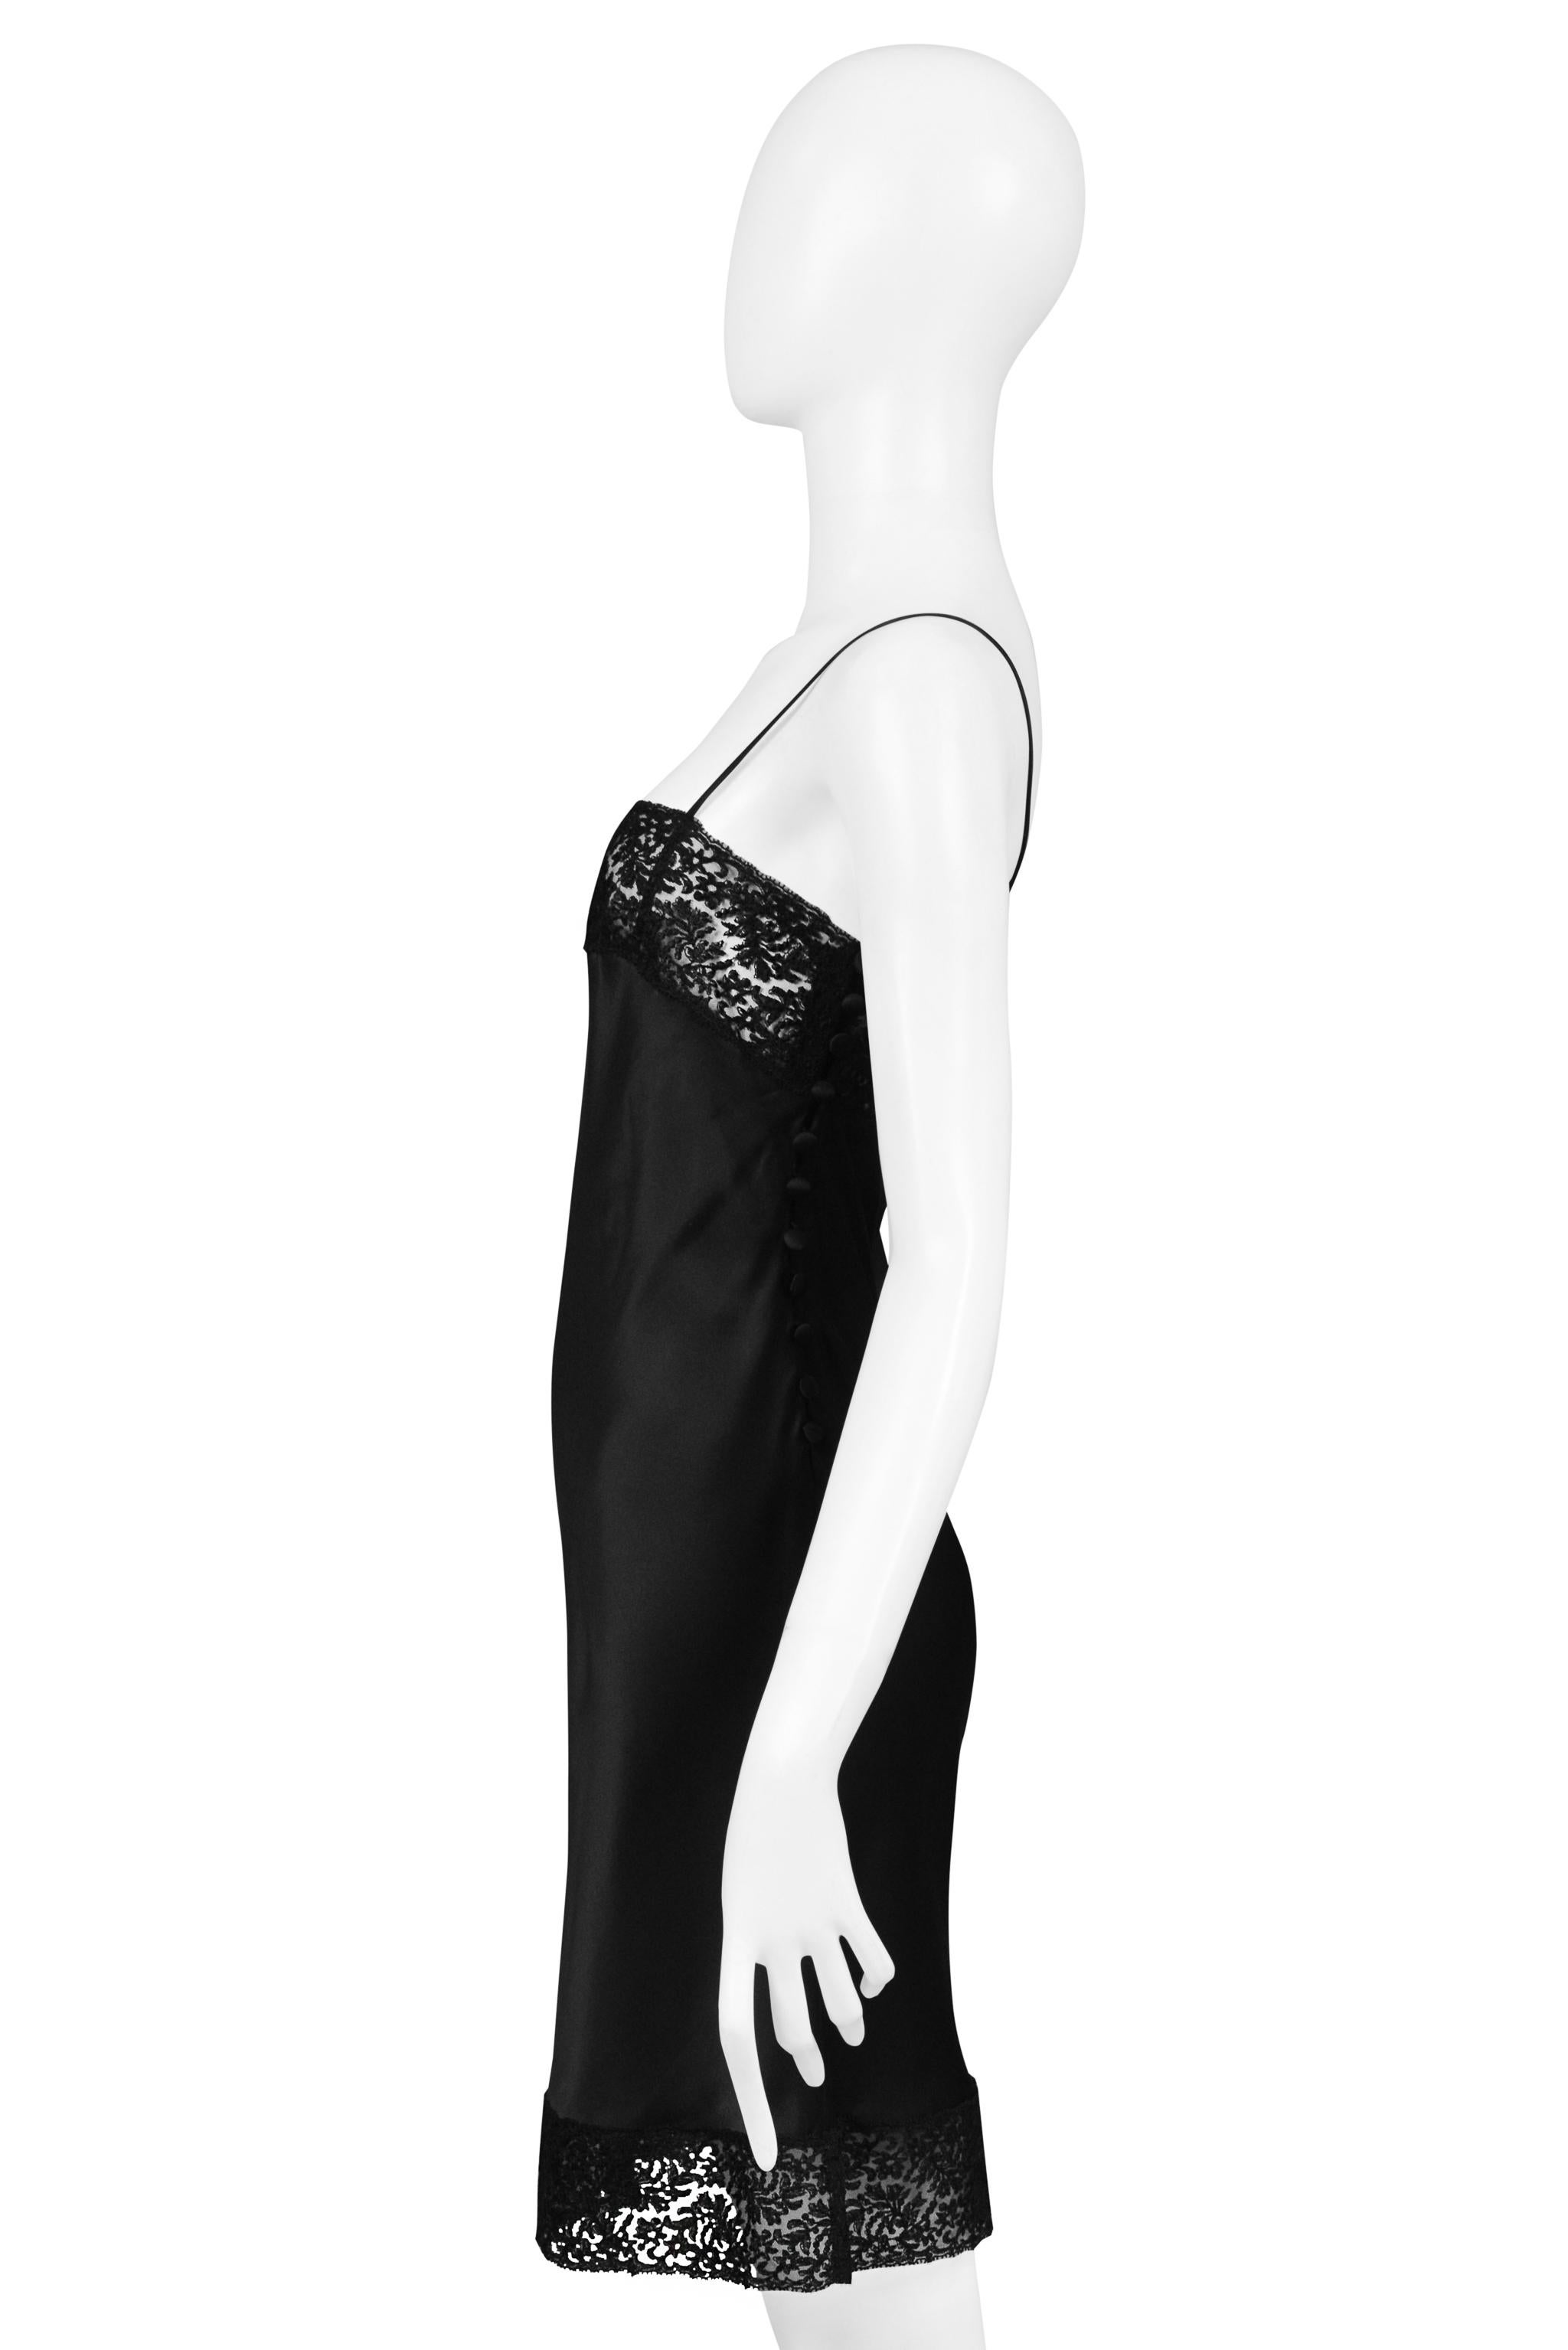 Christian Dior By John Galliano Black Silk And Lace Slip Dress 1997 For Sale 3